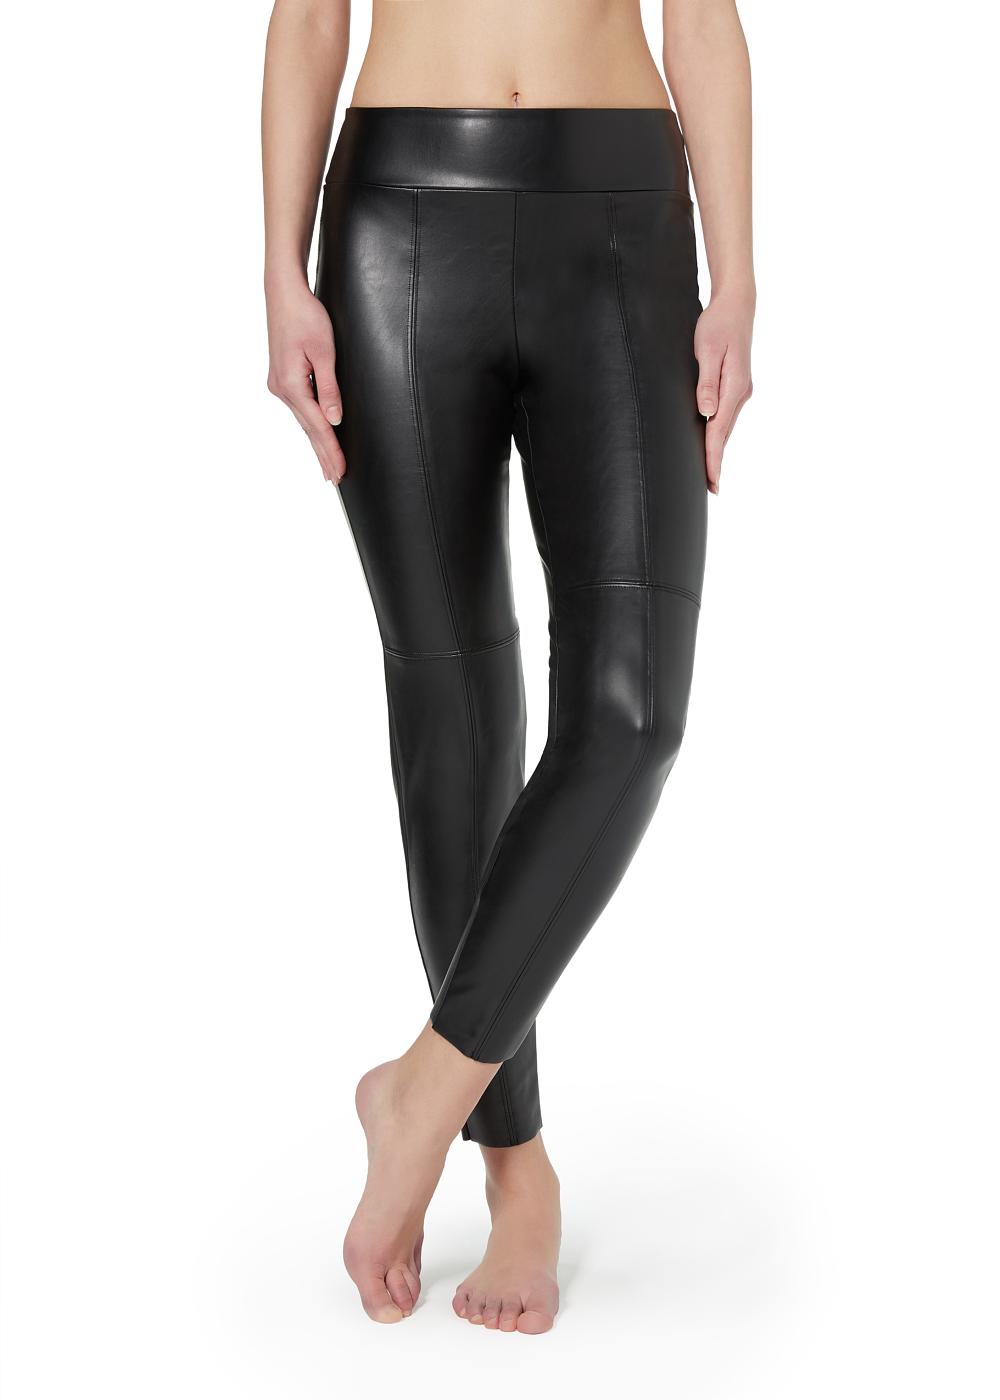 CALZEDONIA LEATHER EFFECT THERMAL FLATE LEGGINGS SIZE M